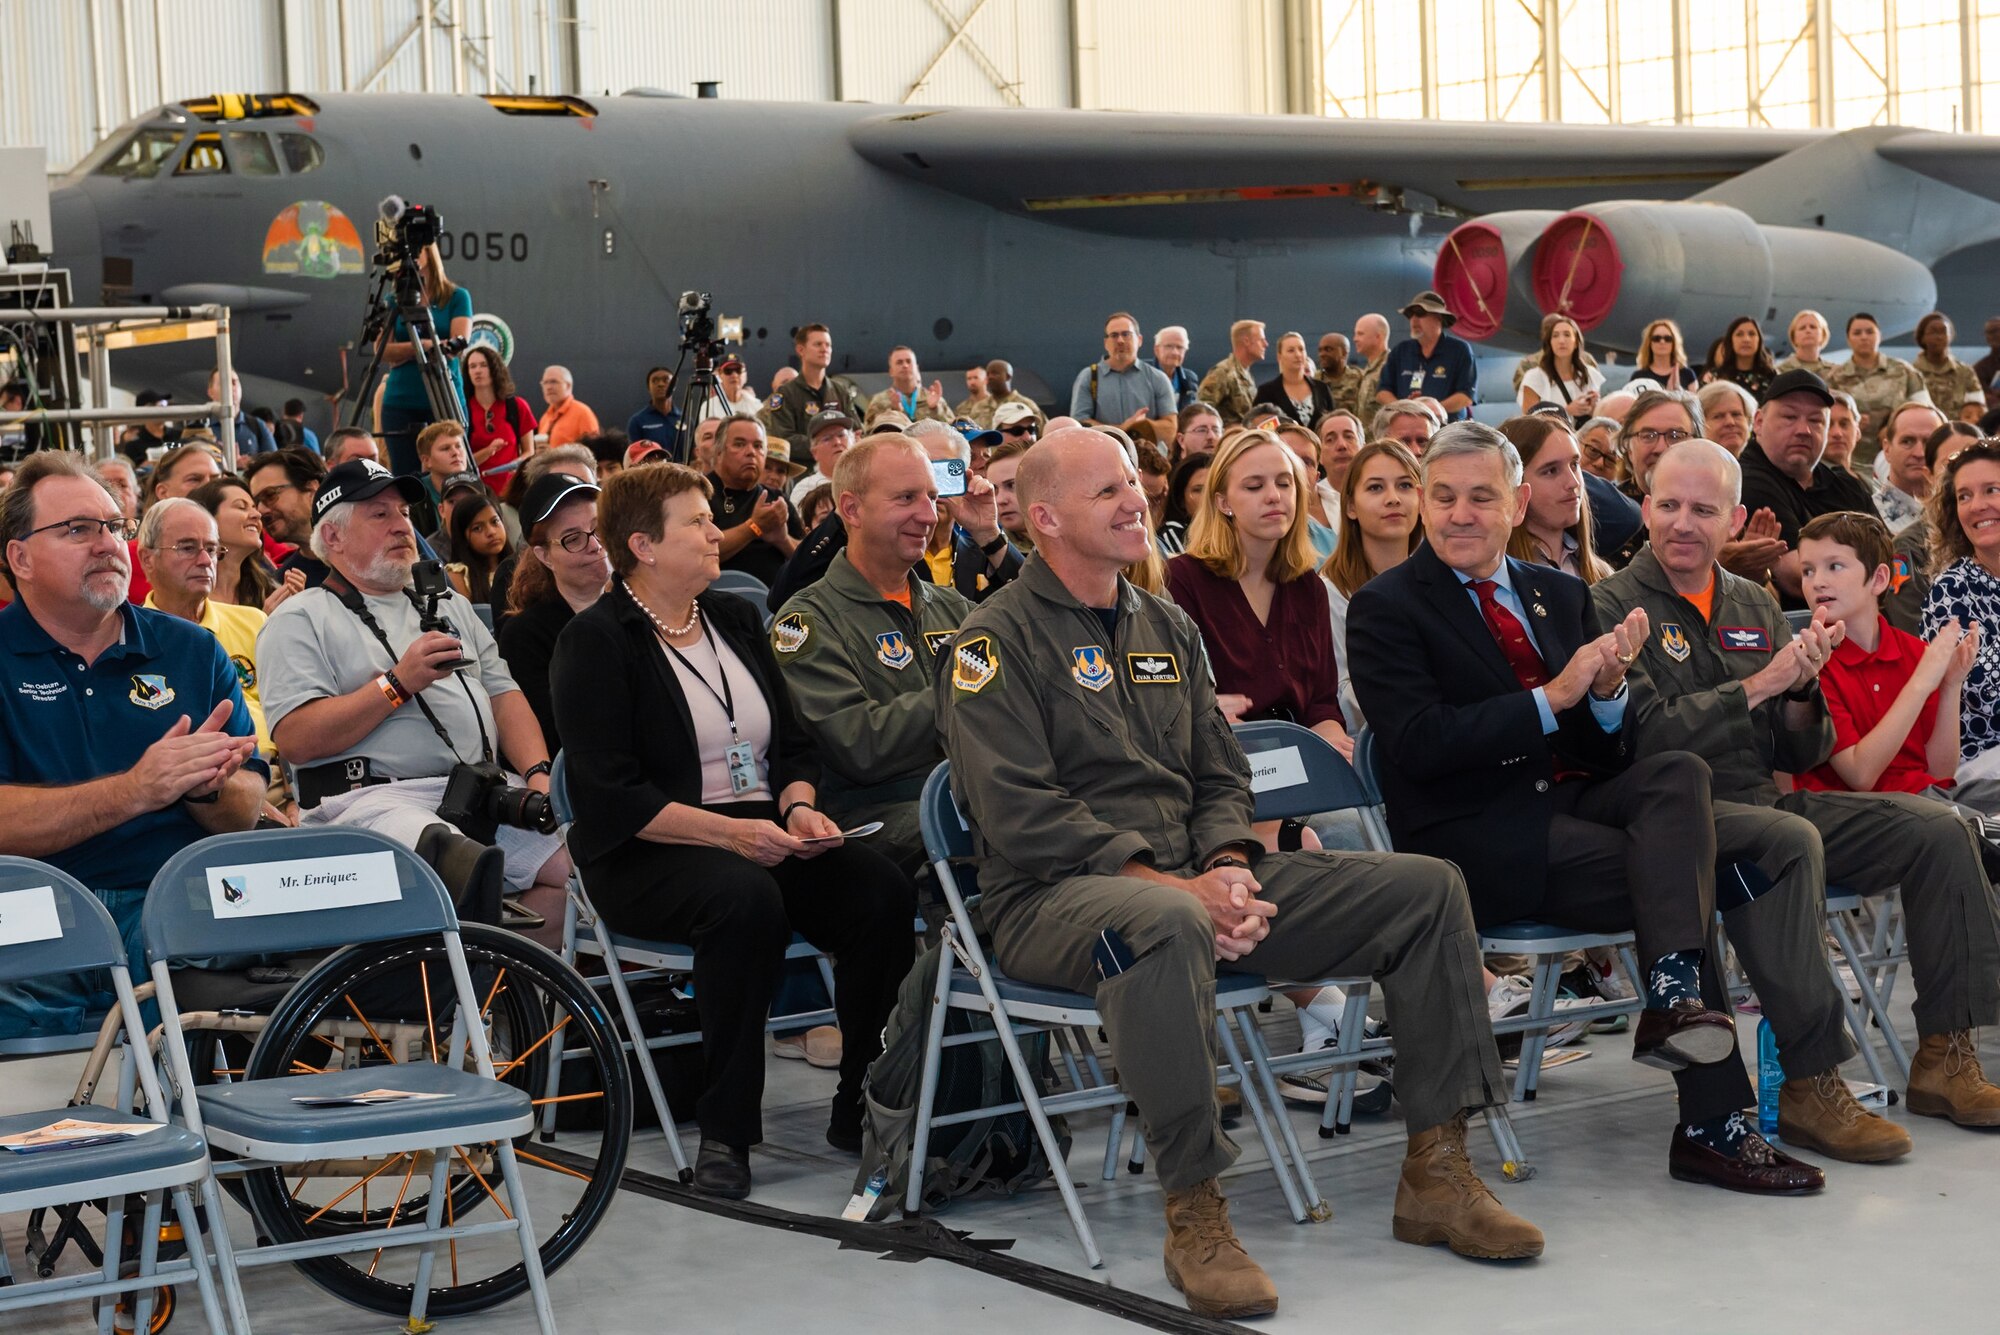 75 years to the day after the Bell X-1 proved that the Sound Barrier was only an engineering challenge, the 412th Test Wing hosted a ceremony to honor the contributions of the team behind that remarkable aircraft